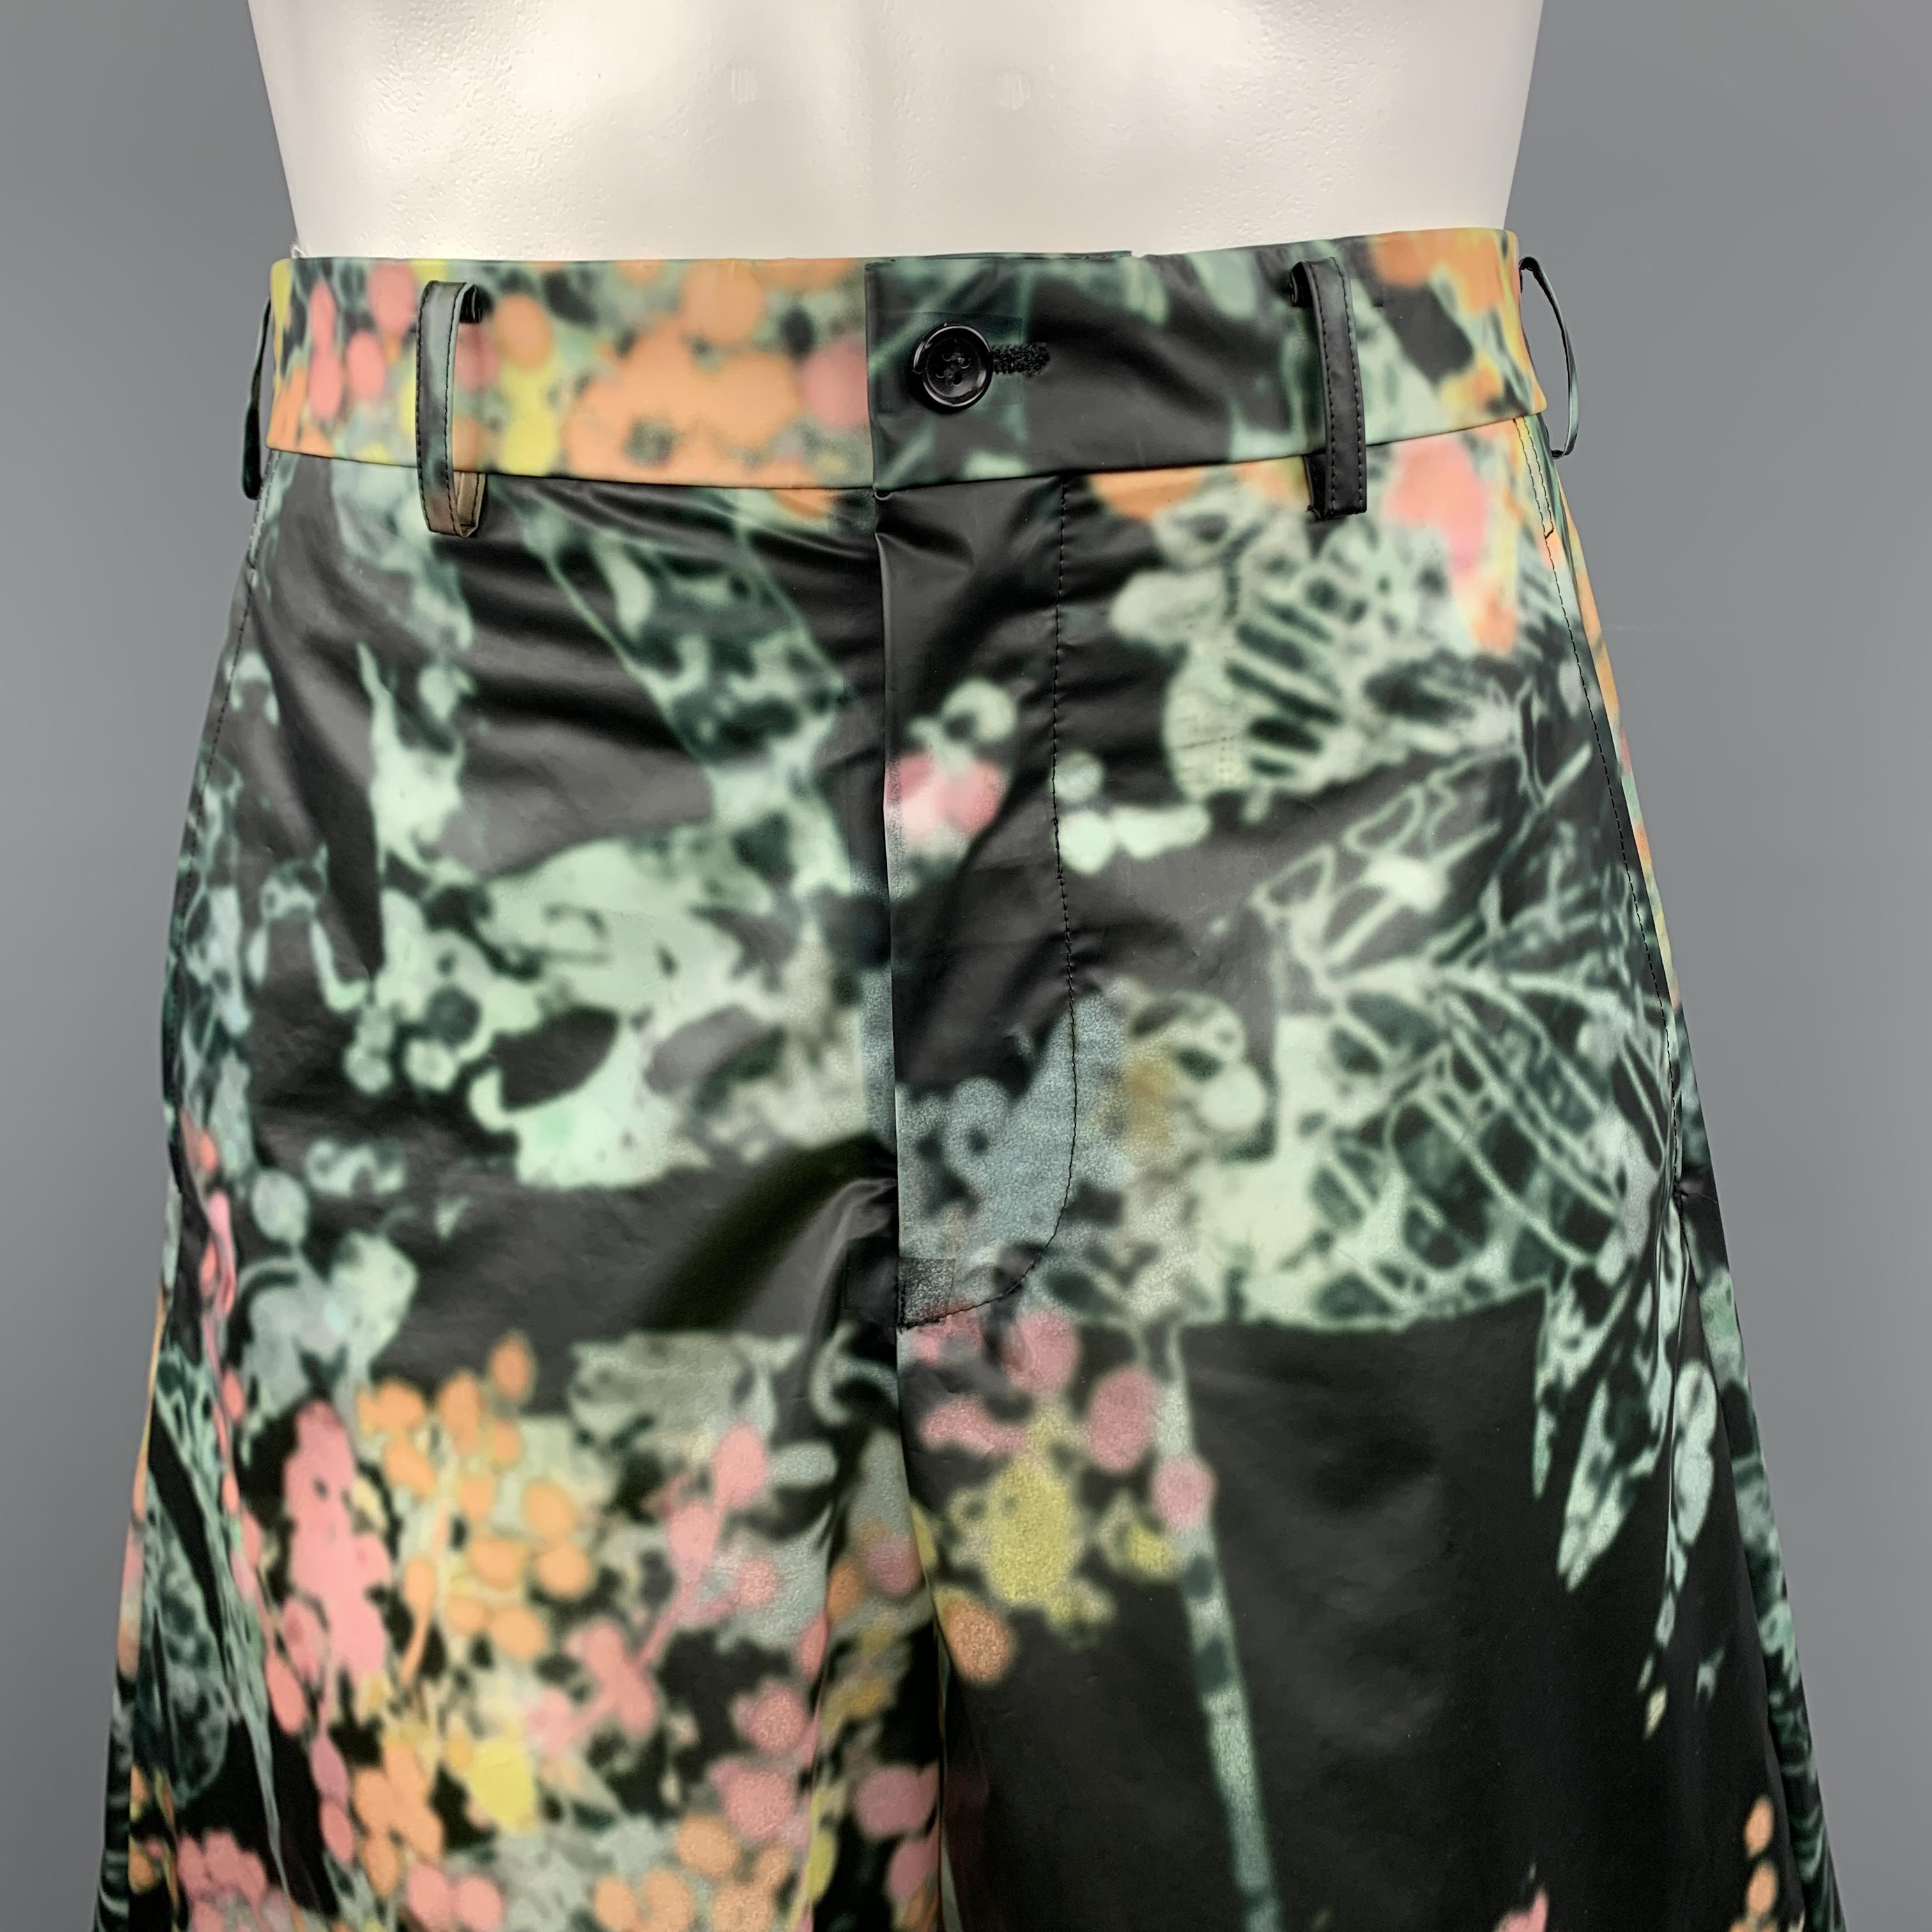 COMME des GARCONS HOMEM PLUS bermuda shorts come in black semi sheer PVC with an all over teal green, yellow, pink, and orange abstract marbled floral pattern and wide leg. Made in Japan.

Excellent Pre-Owned Condition.
Marked: S  AD